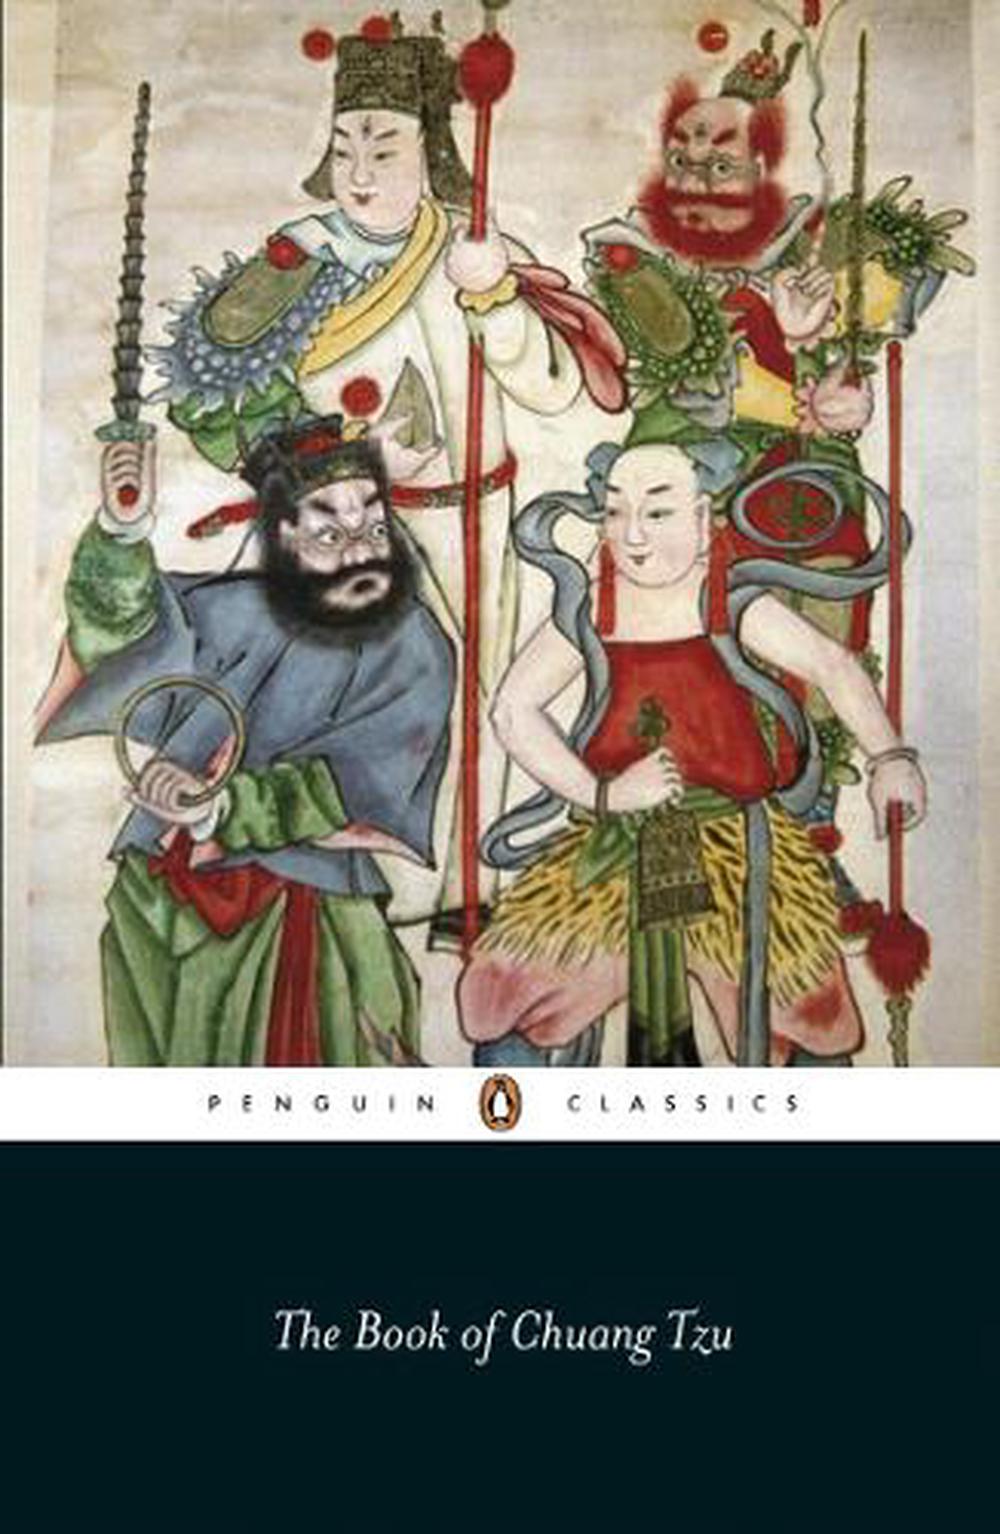 the complete works of chuang tzu translated by burton watson